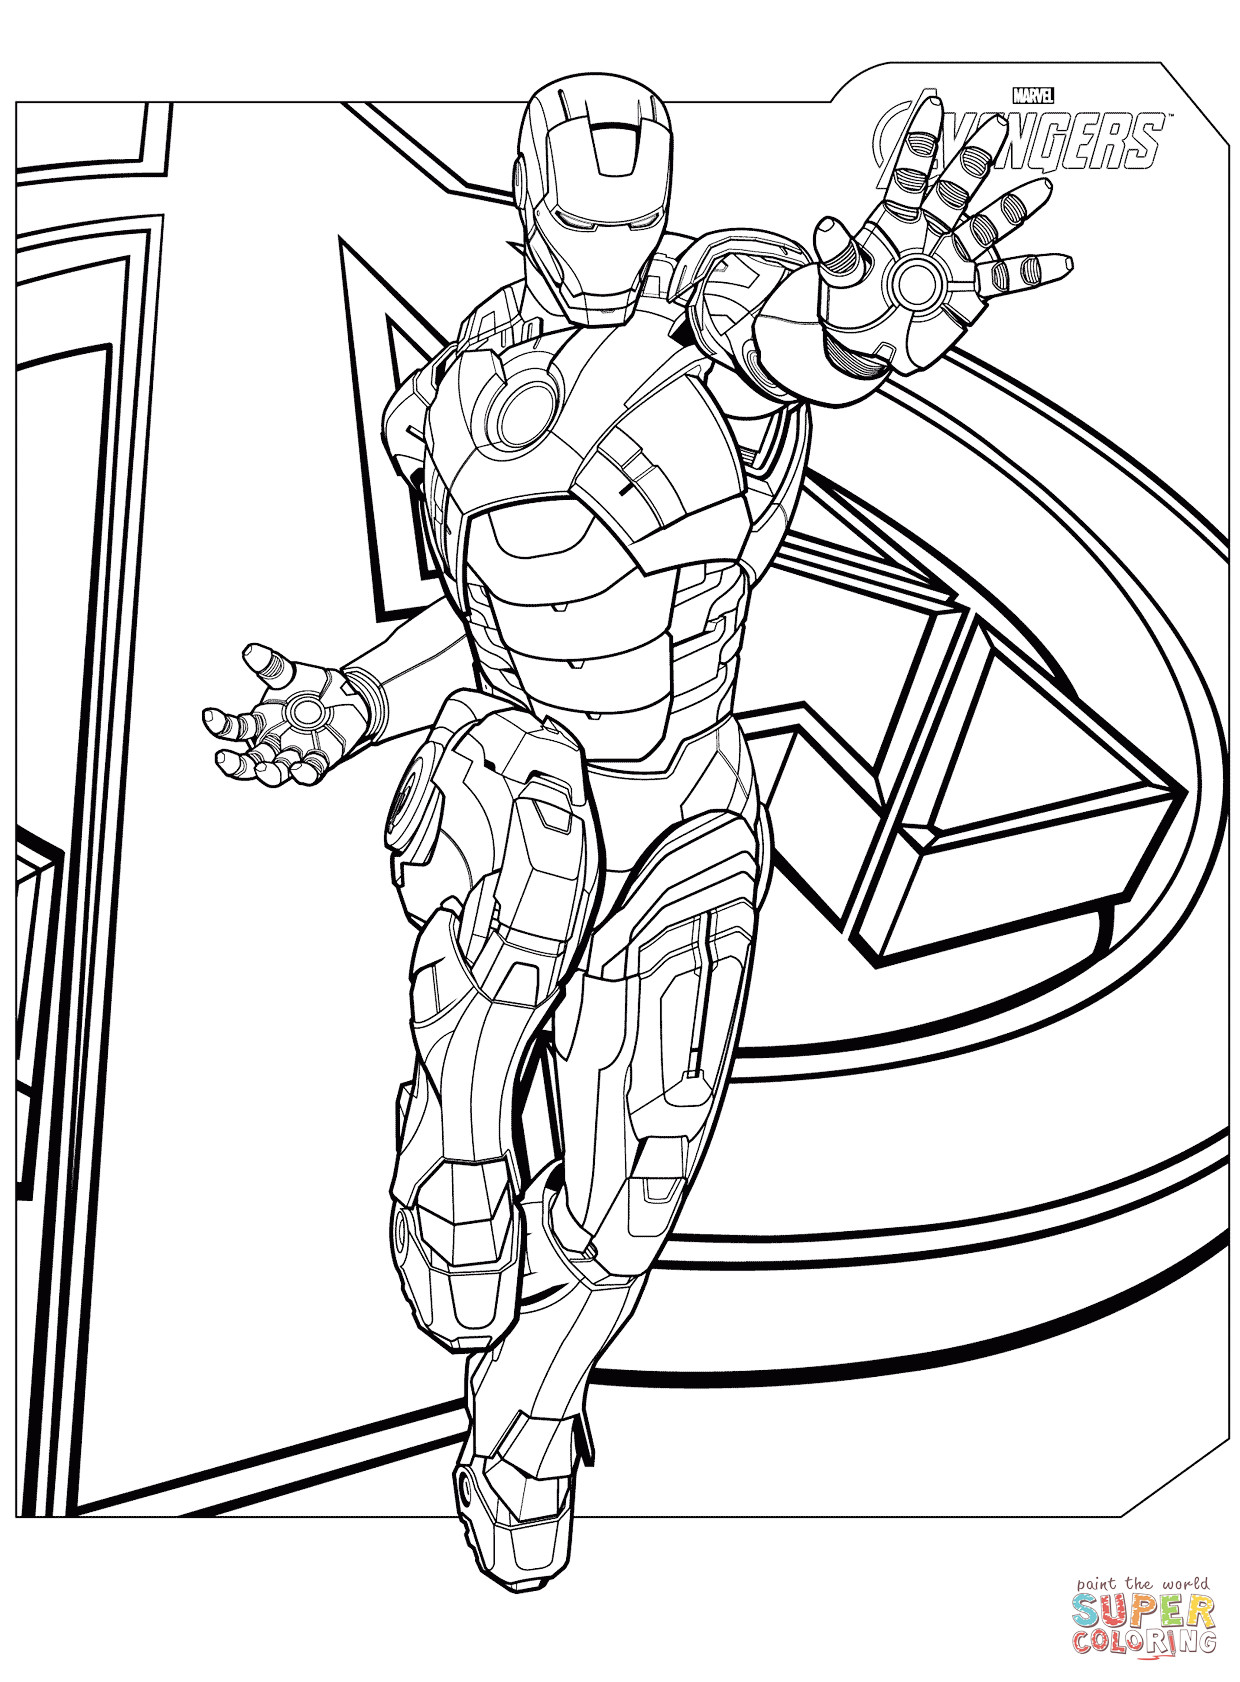 Coloring Pages Avengers
 Avengers Iron Man coloring page